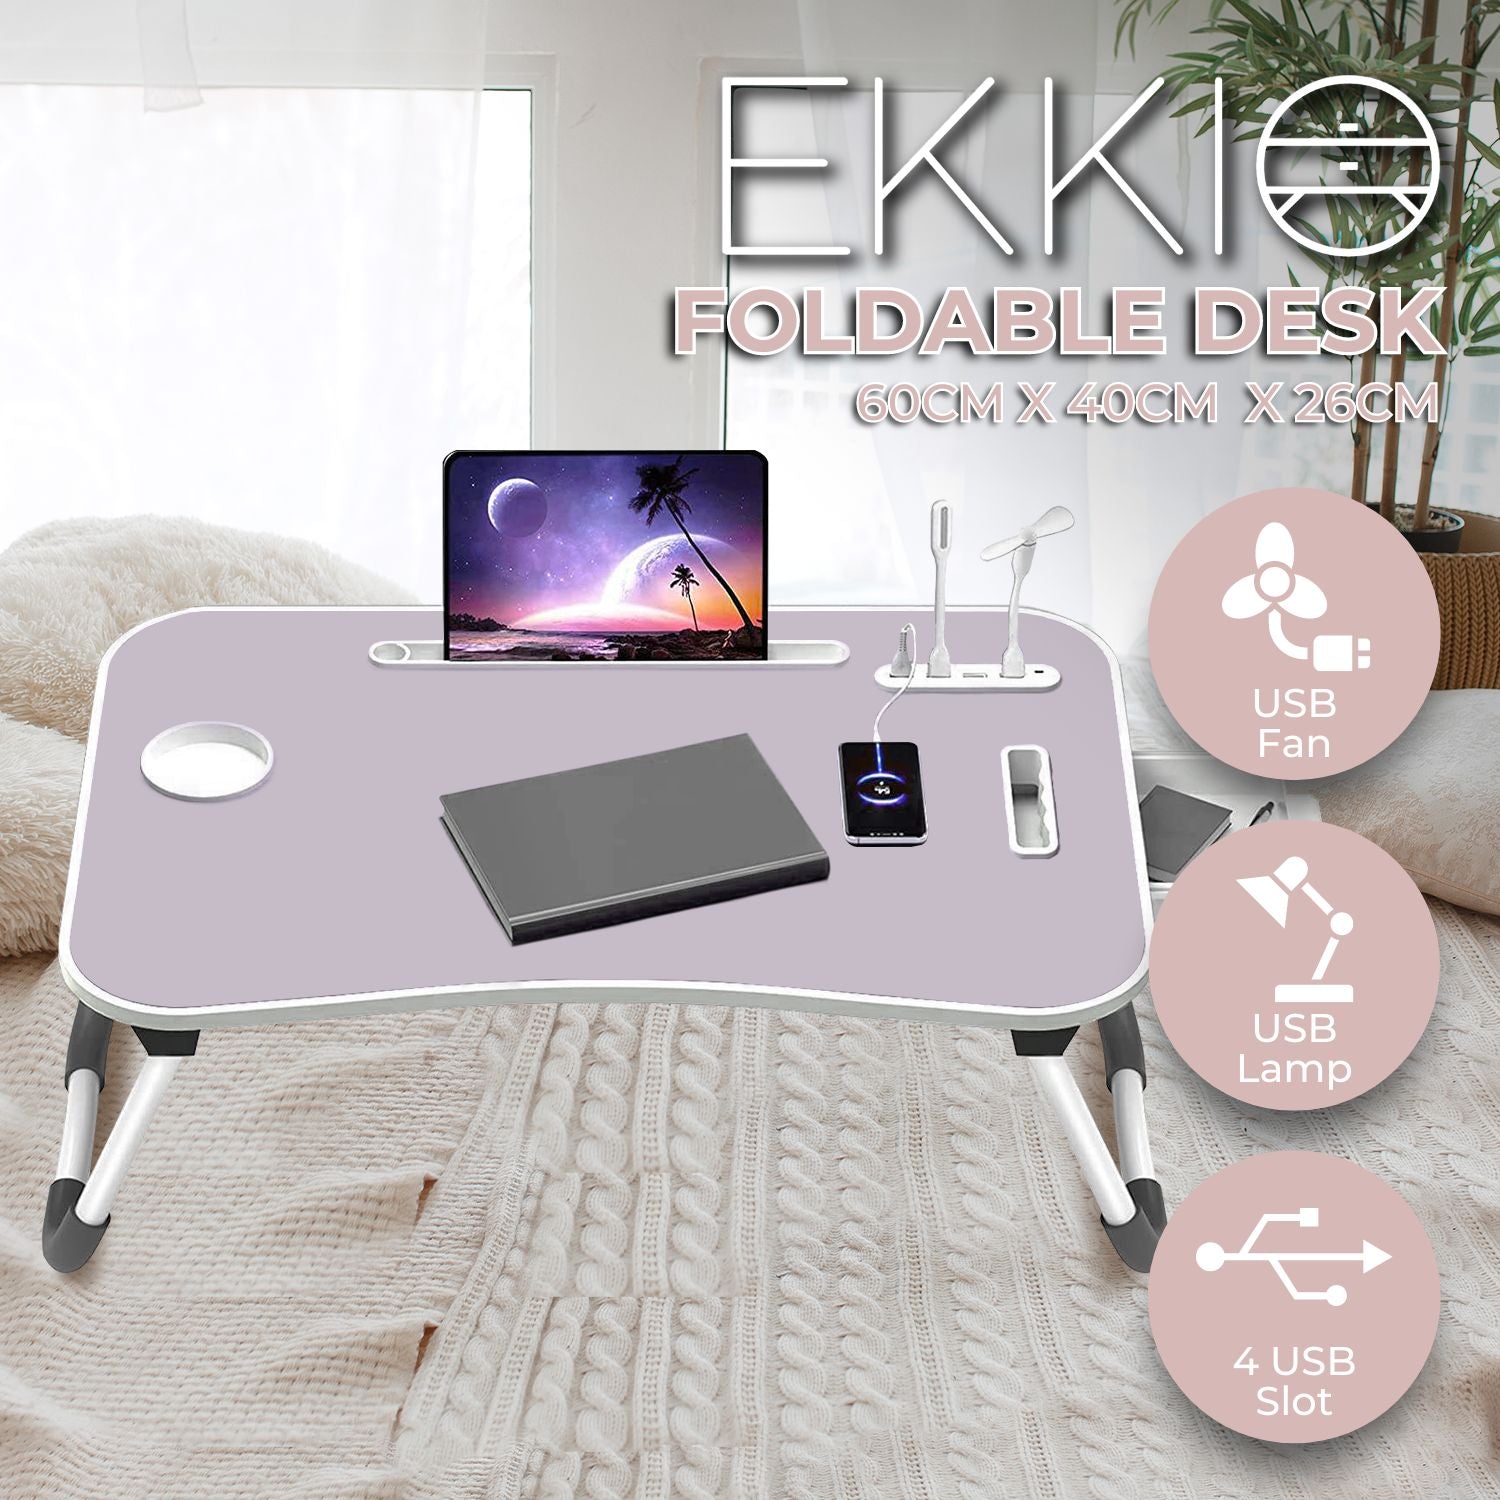 Portable Laptop Bed Desk Foldable Legs with USB Charge Port Home Office White